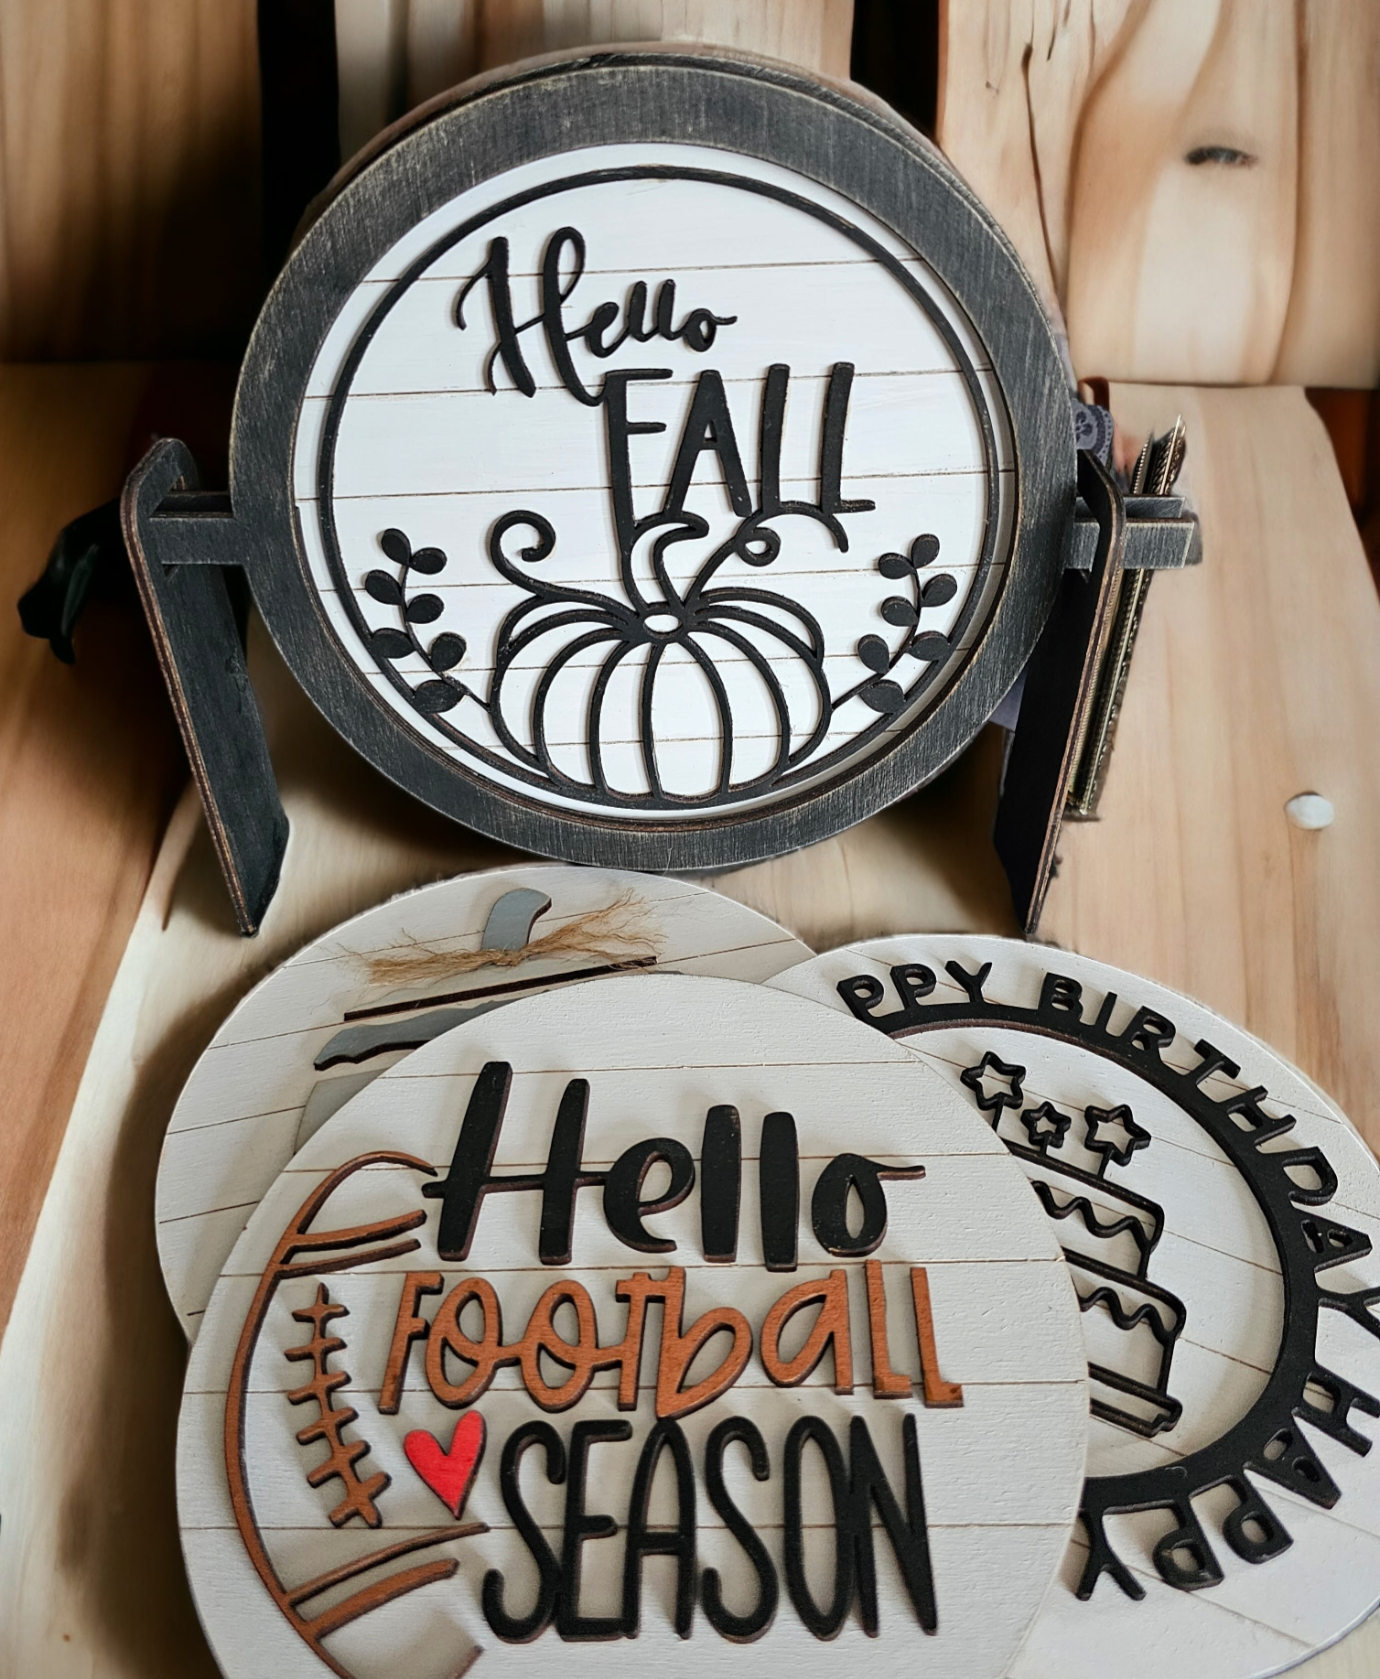 This Interchangeable Farmhouse style frame is the perfect way to display your unique messages and sentiments. Crafted from birch wood, it's designed to hold 5" laser cut interchangeable round inserts that you can customize for holidays, birthdays and other special occasions. It's a rustic-chic way to add a splash of style to any tabletop!   